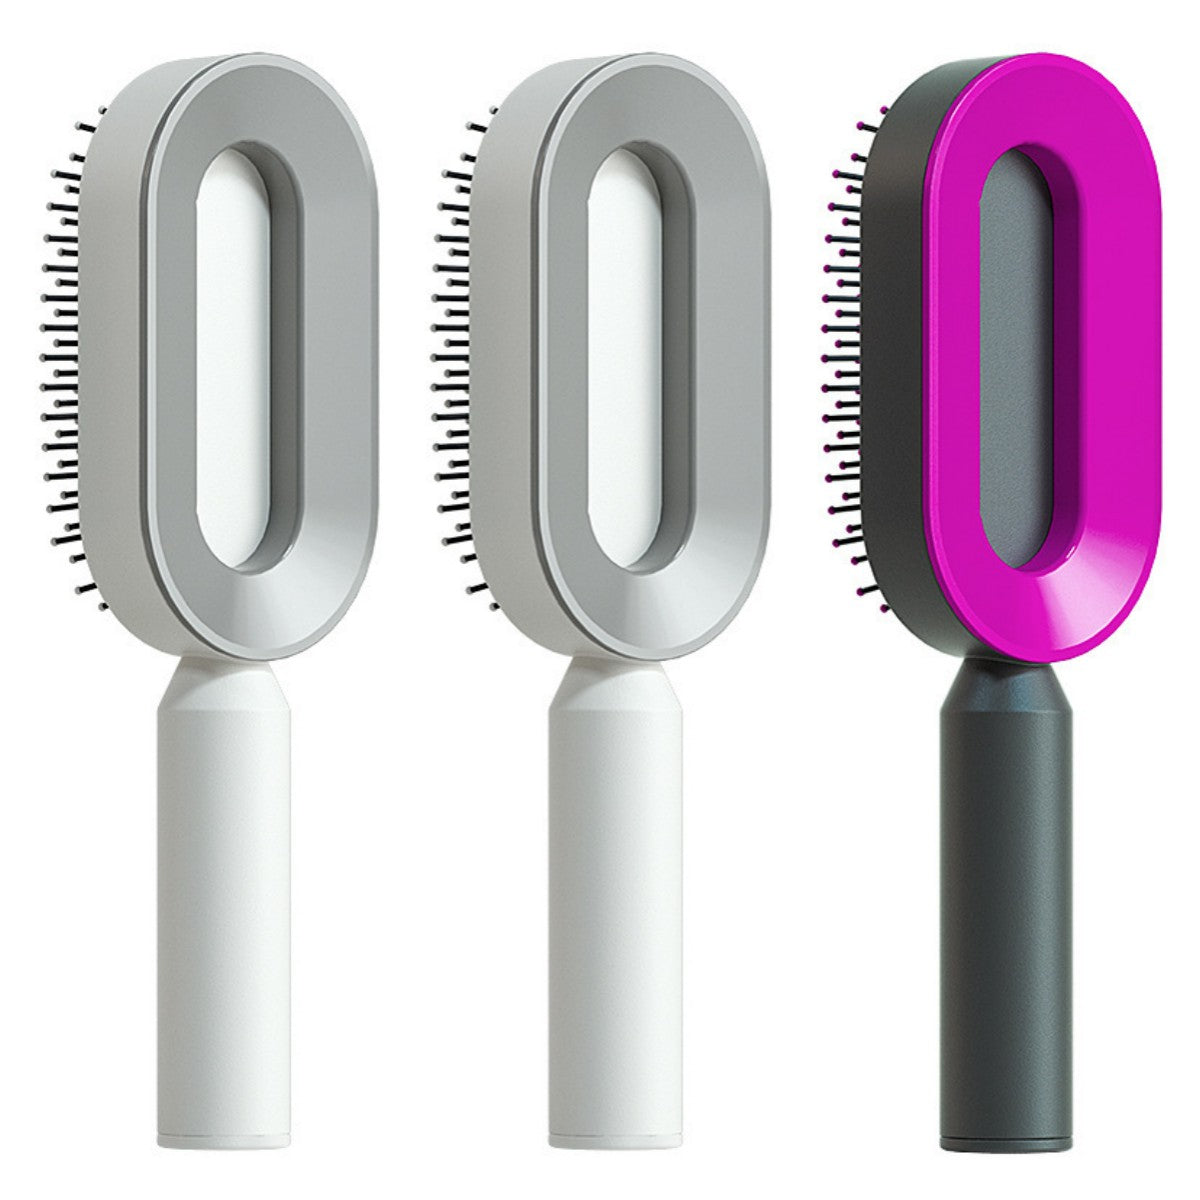 Self Cleaning Hair Brush For Women One-key Cleaning Hair Loss Airbag Massage Scalp Comb Anti-Static Hairbrush Set W